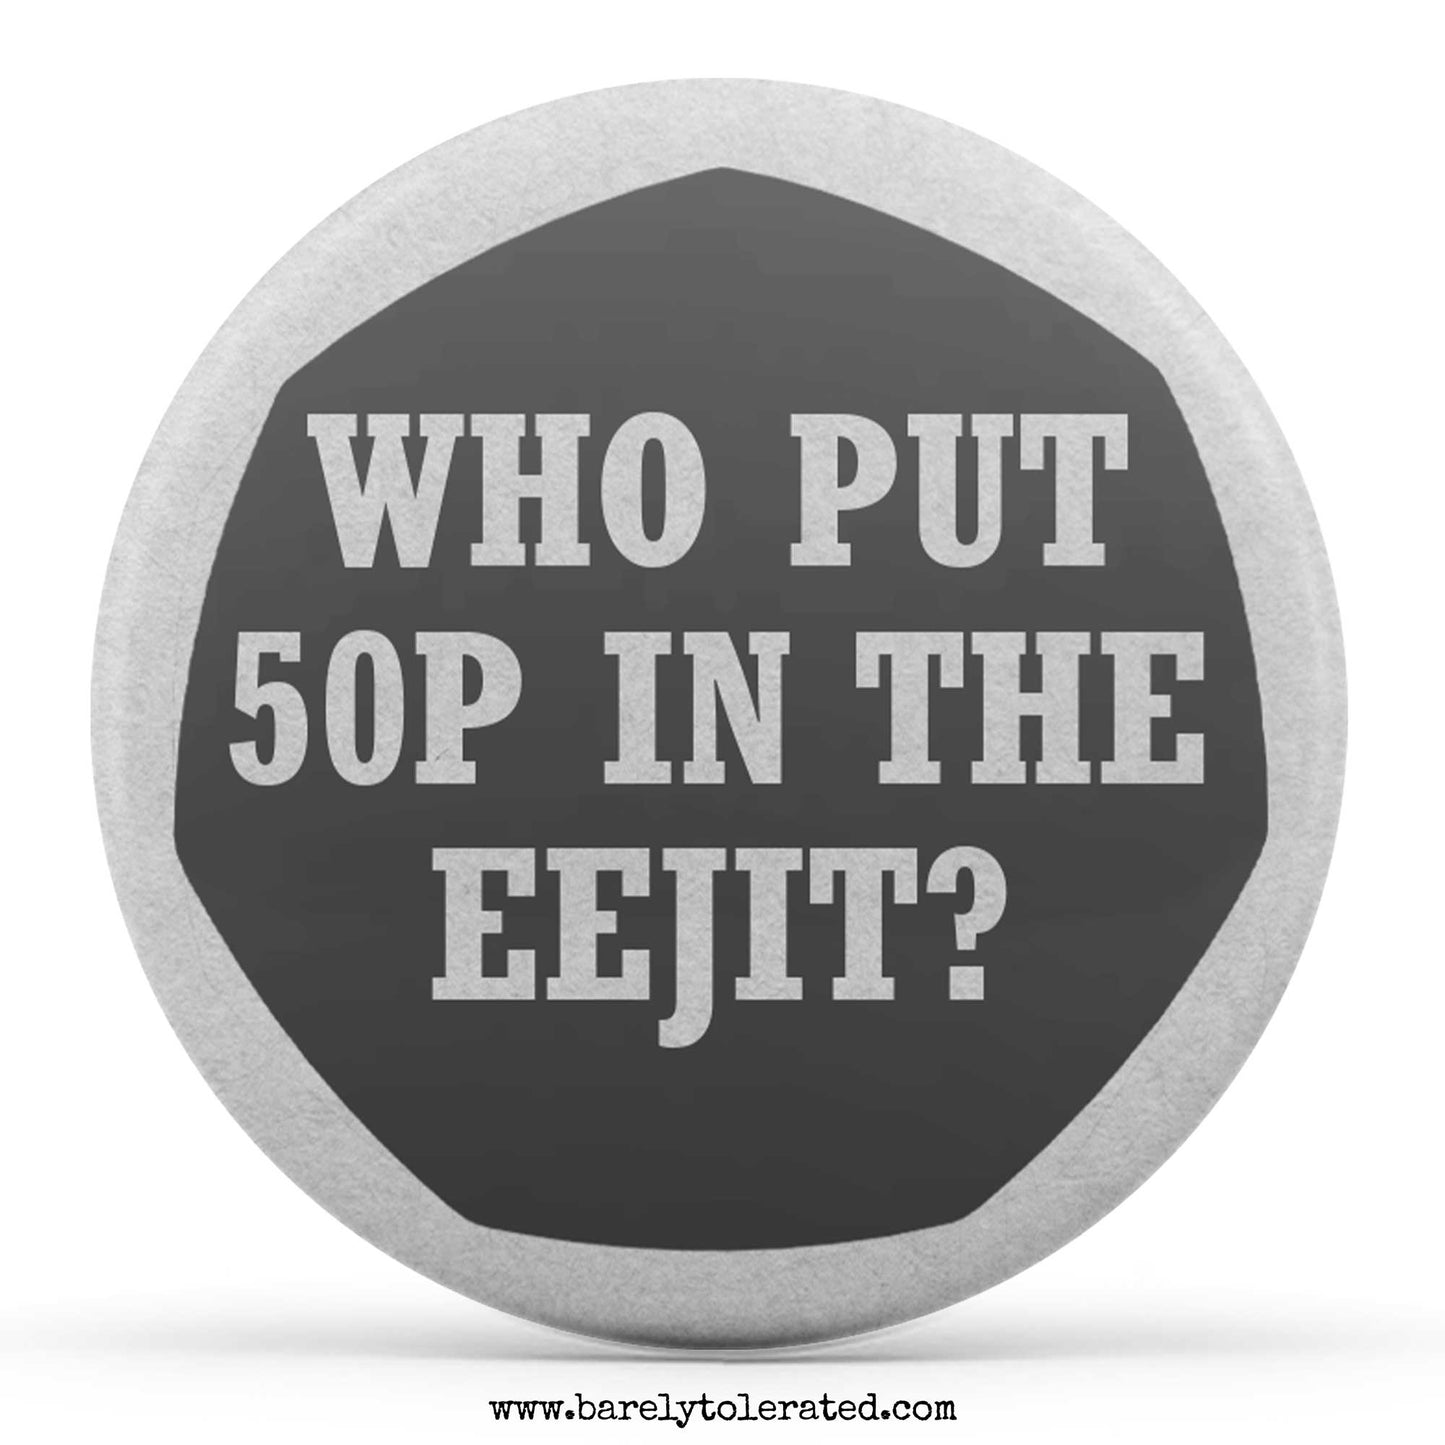 Who put 50p in the Eejit?